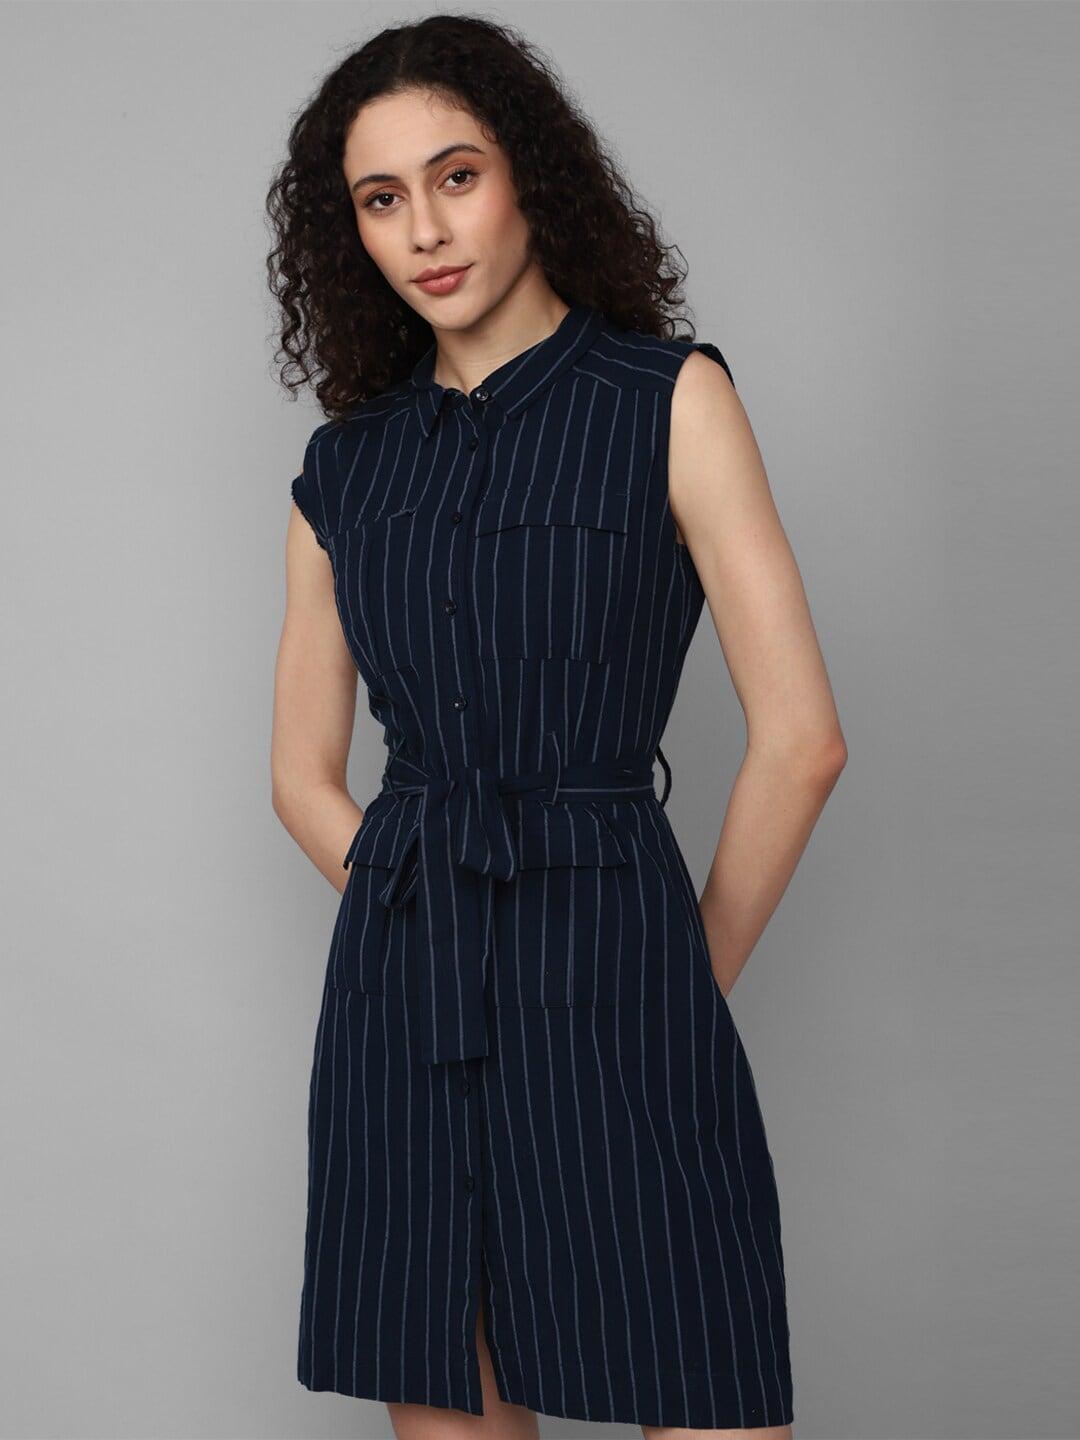 allen-solly-woman-striped-oversized-pocket-tie-up-cotton-shirt-style-dress